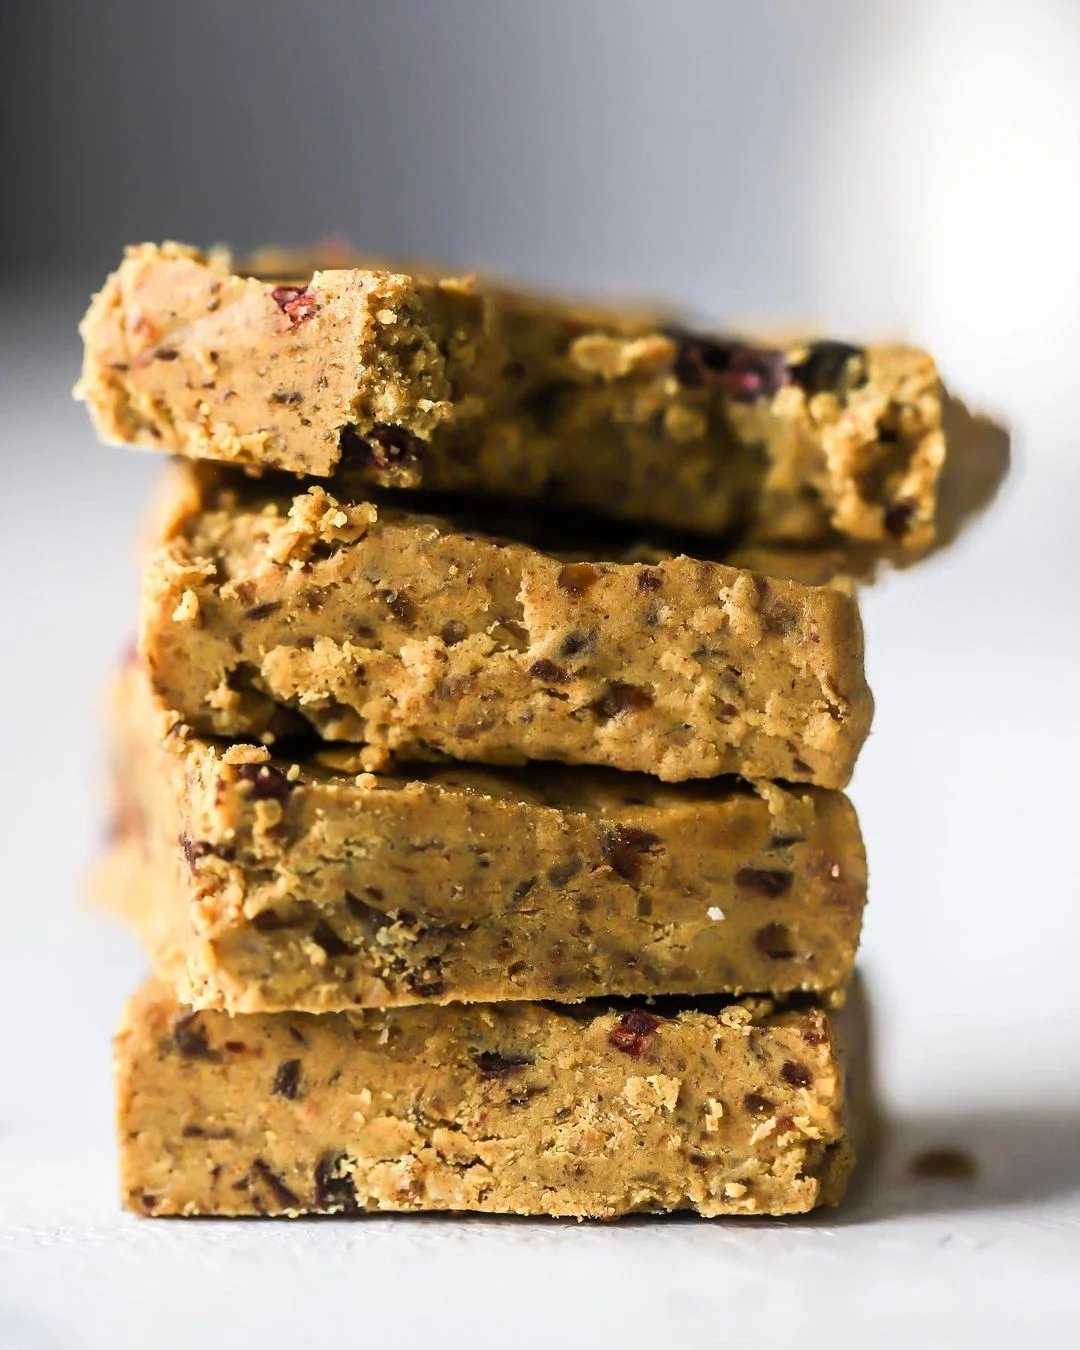 Photo shows some banana flavored protein bars.